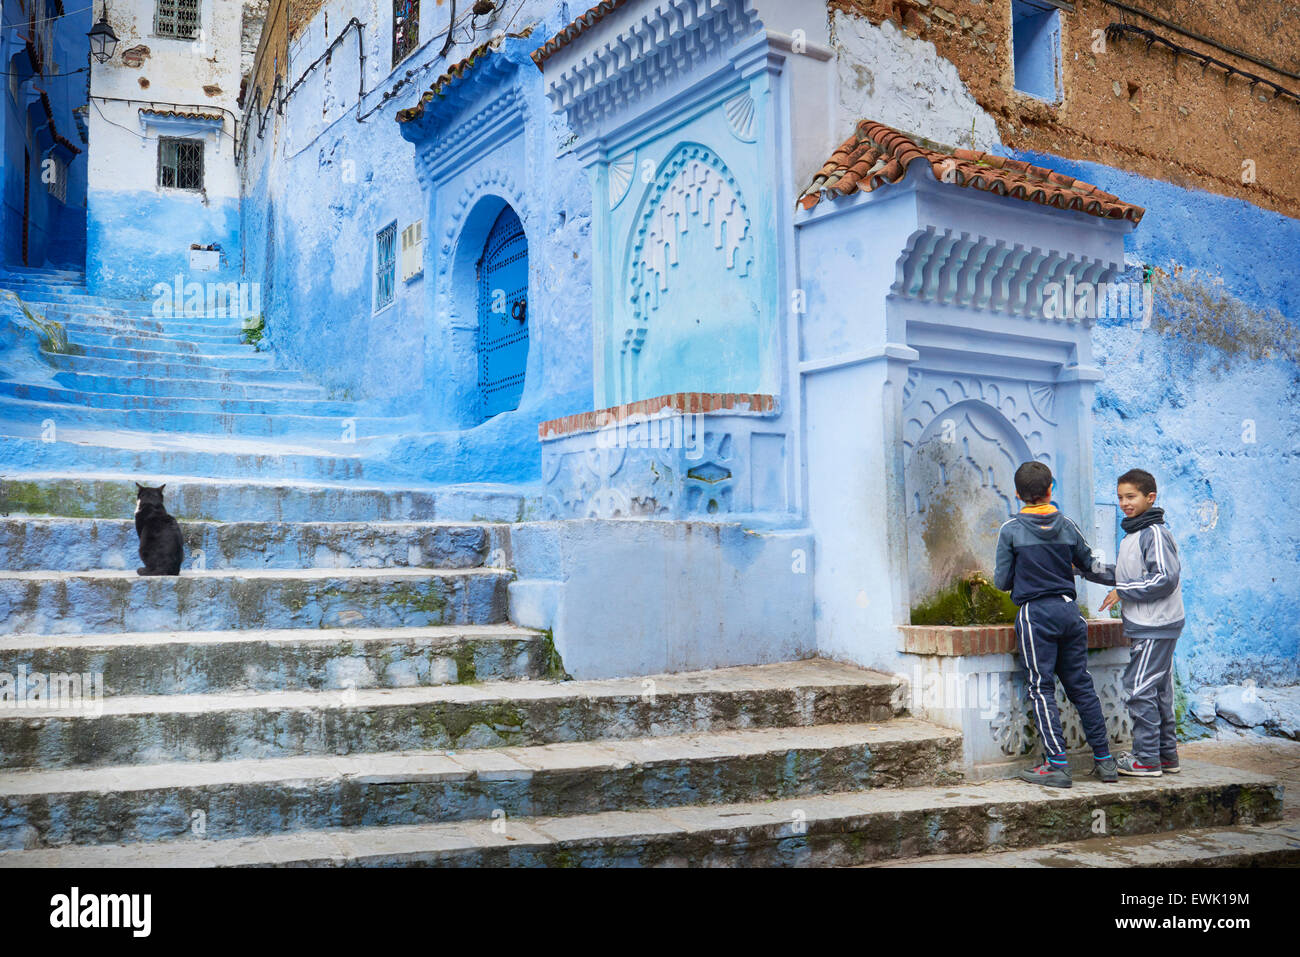 Blue painted walls in old medina of Chefchaouen (Blue City), Morocco, Africa Stock Photo